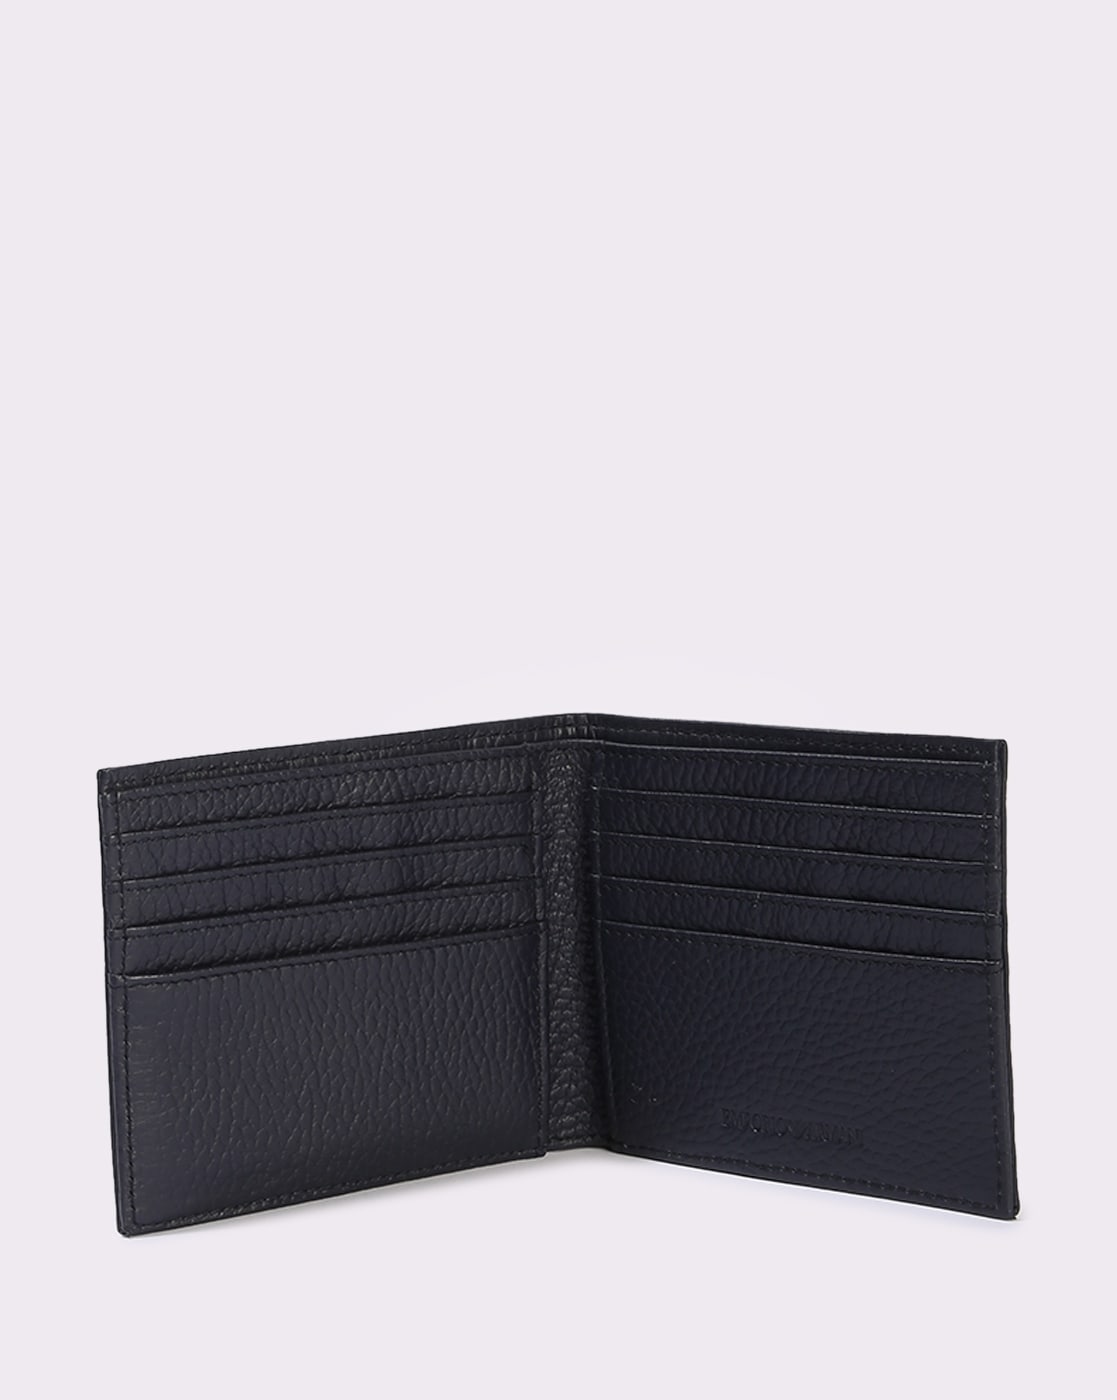 Buy URBAN FOREST George Black Leather Wallet for Men at Amazon.in